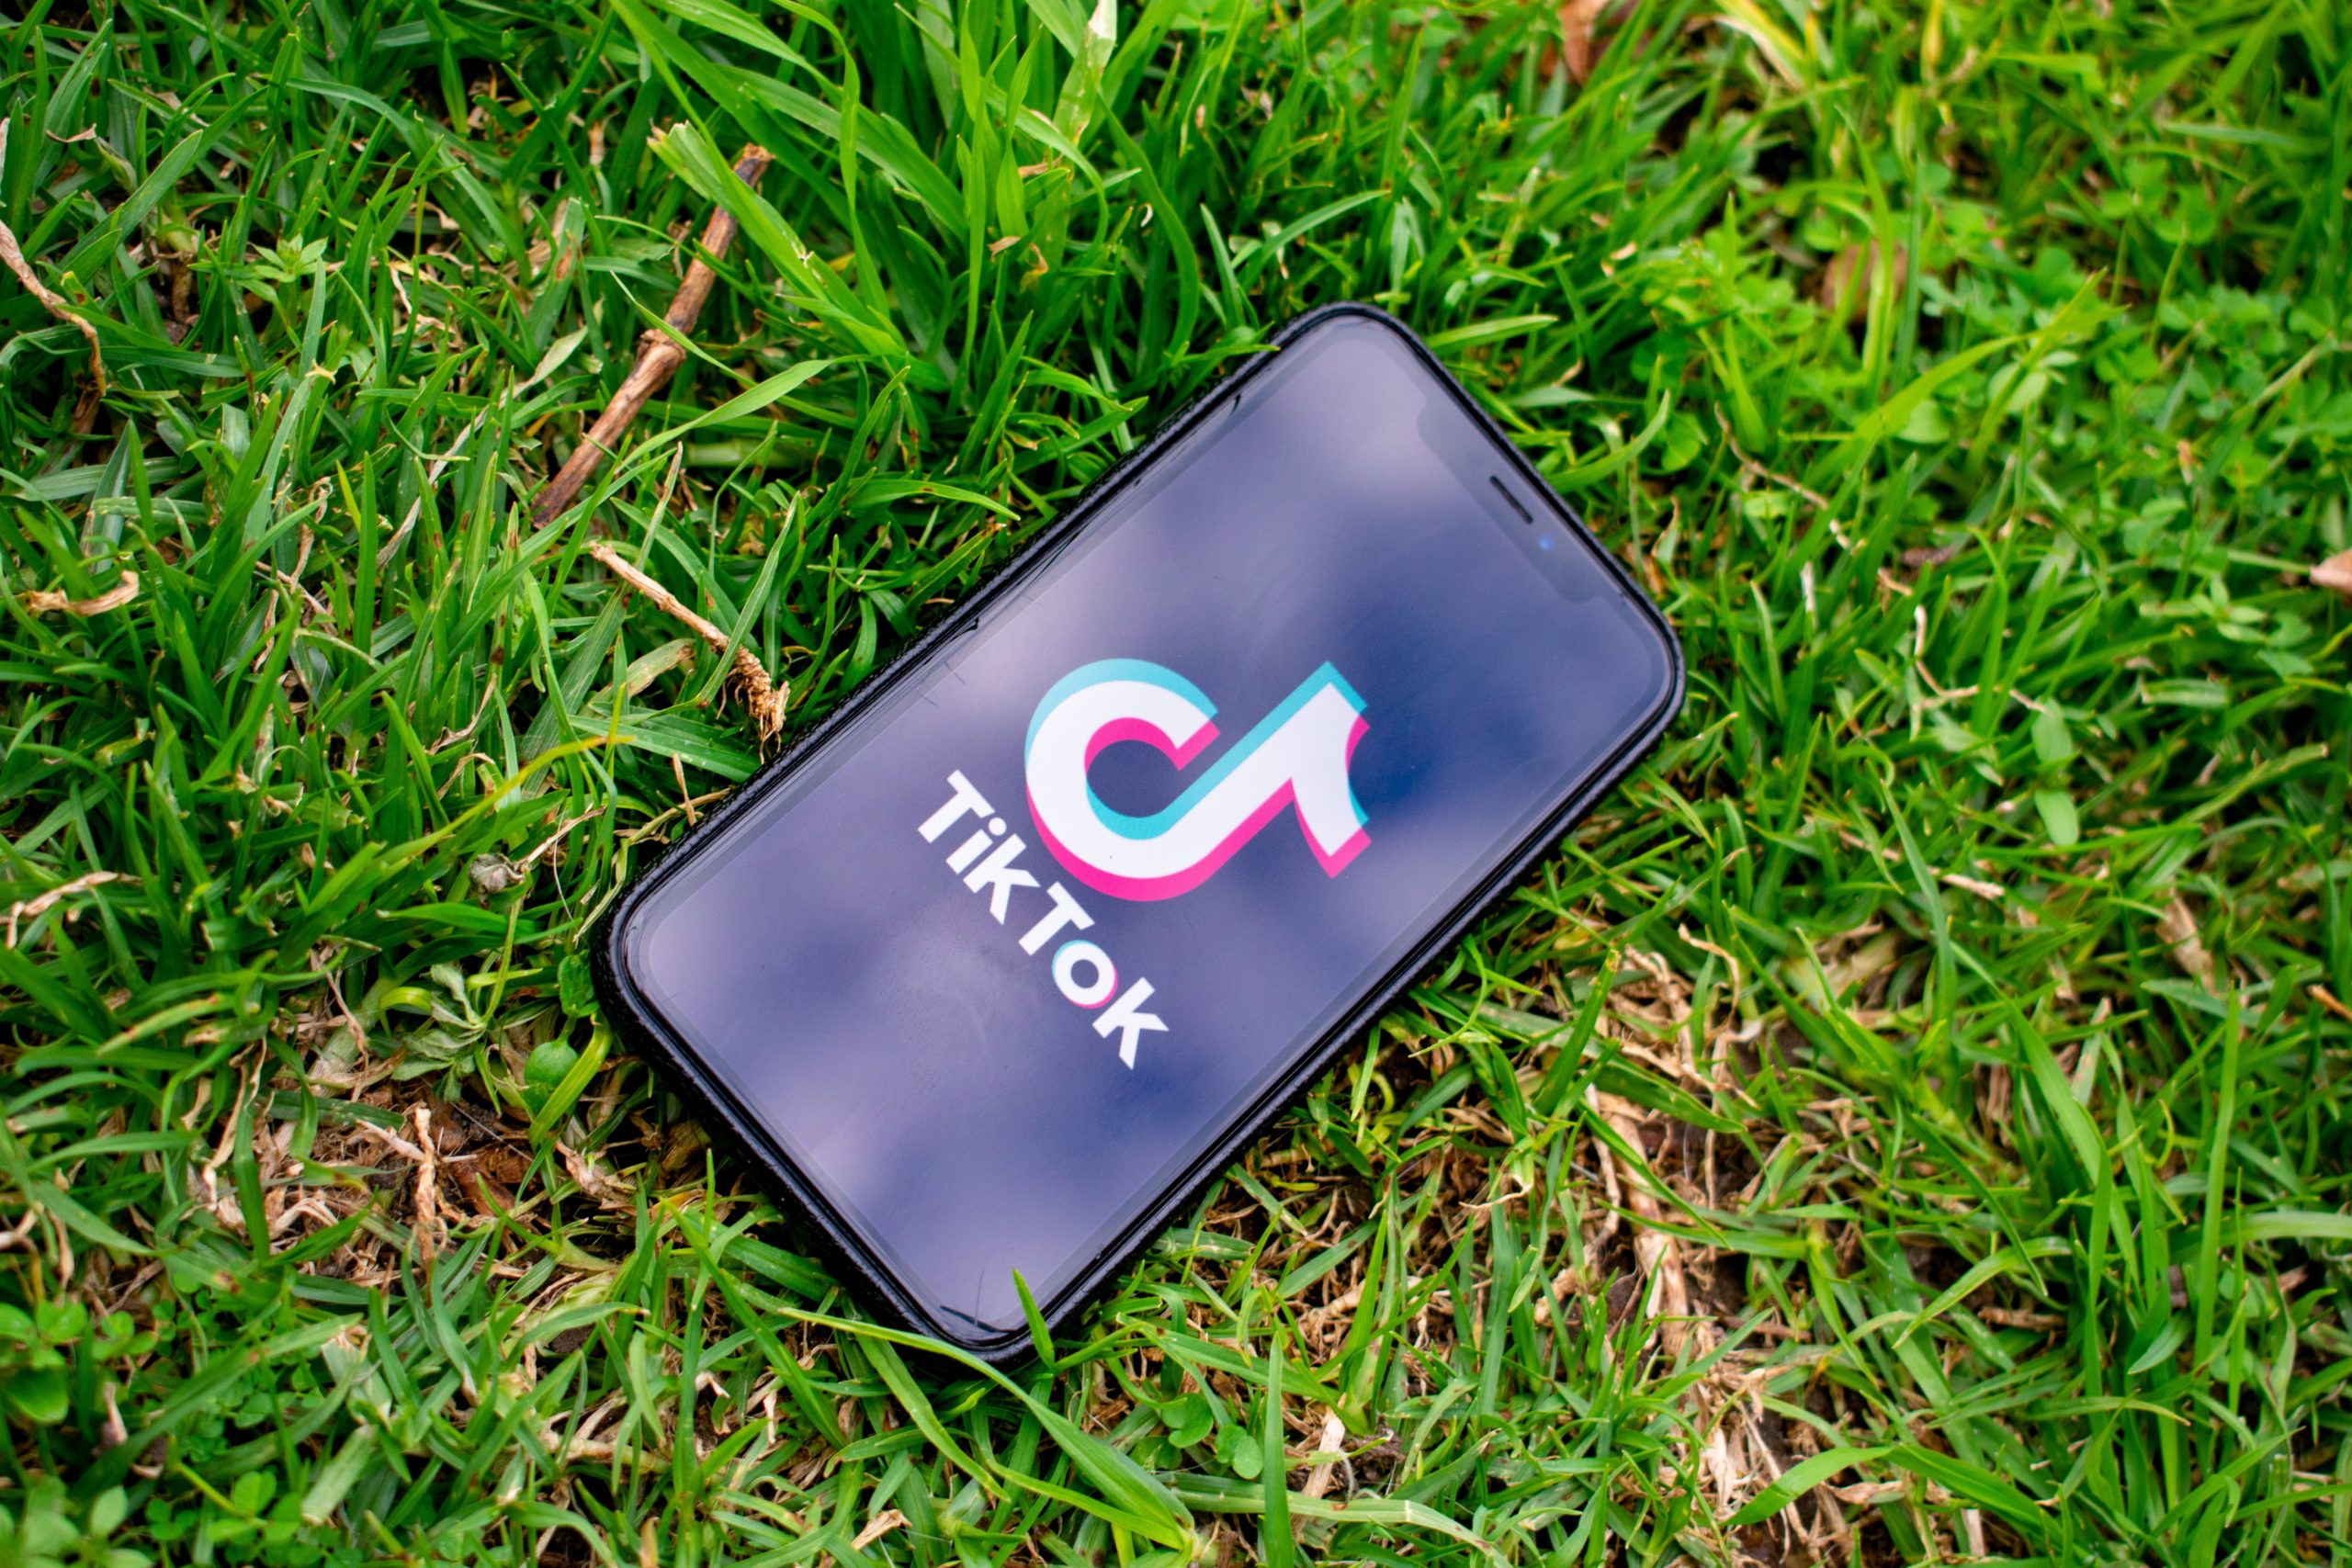 Trends explained: What is a Heather on TikTok?